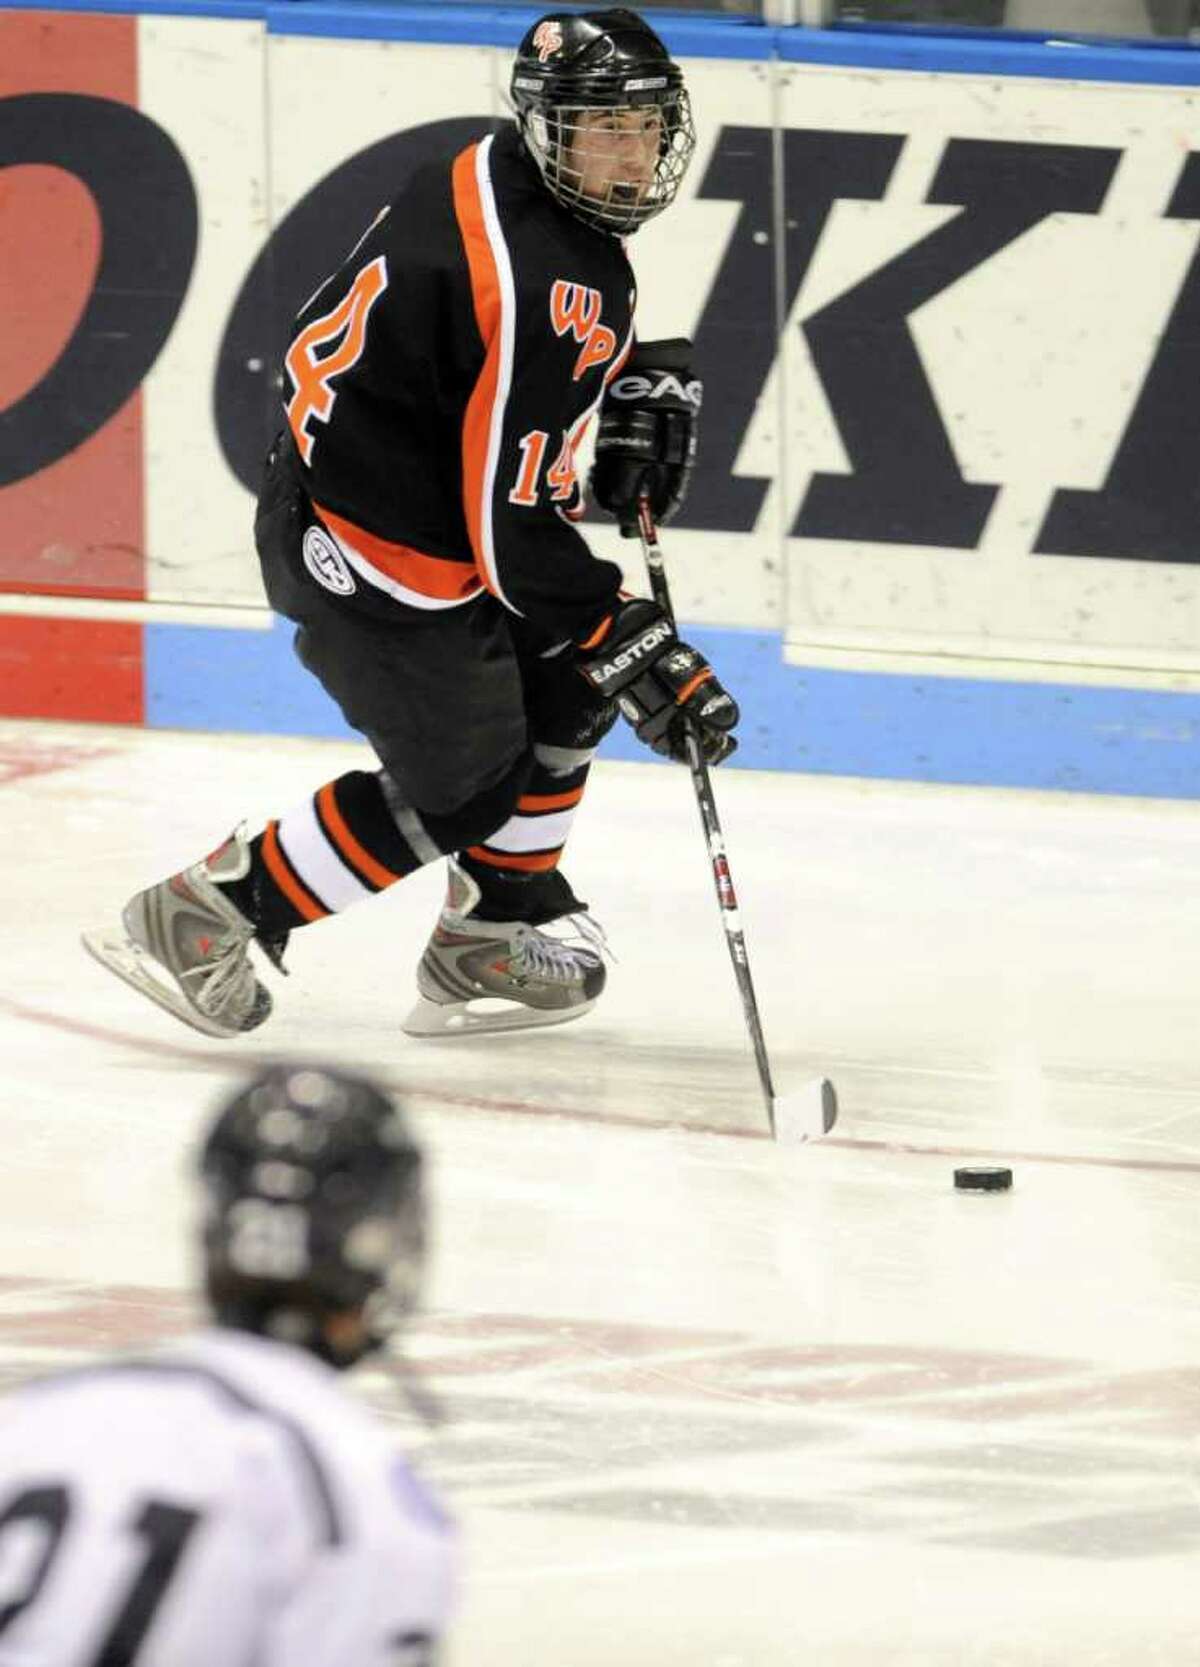 Watertown-Pomperaug takes on Staples-Weston-Shelton in the Division III state playoff game at Yale University's Ingalls Rink Saturday, Mar. 19, 2011.